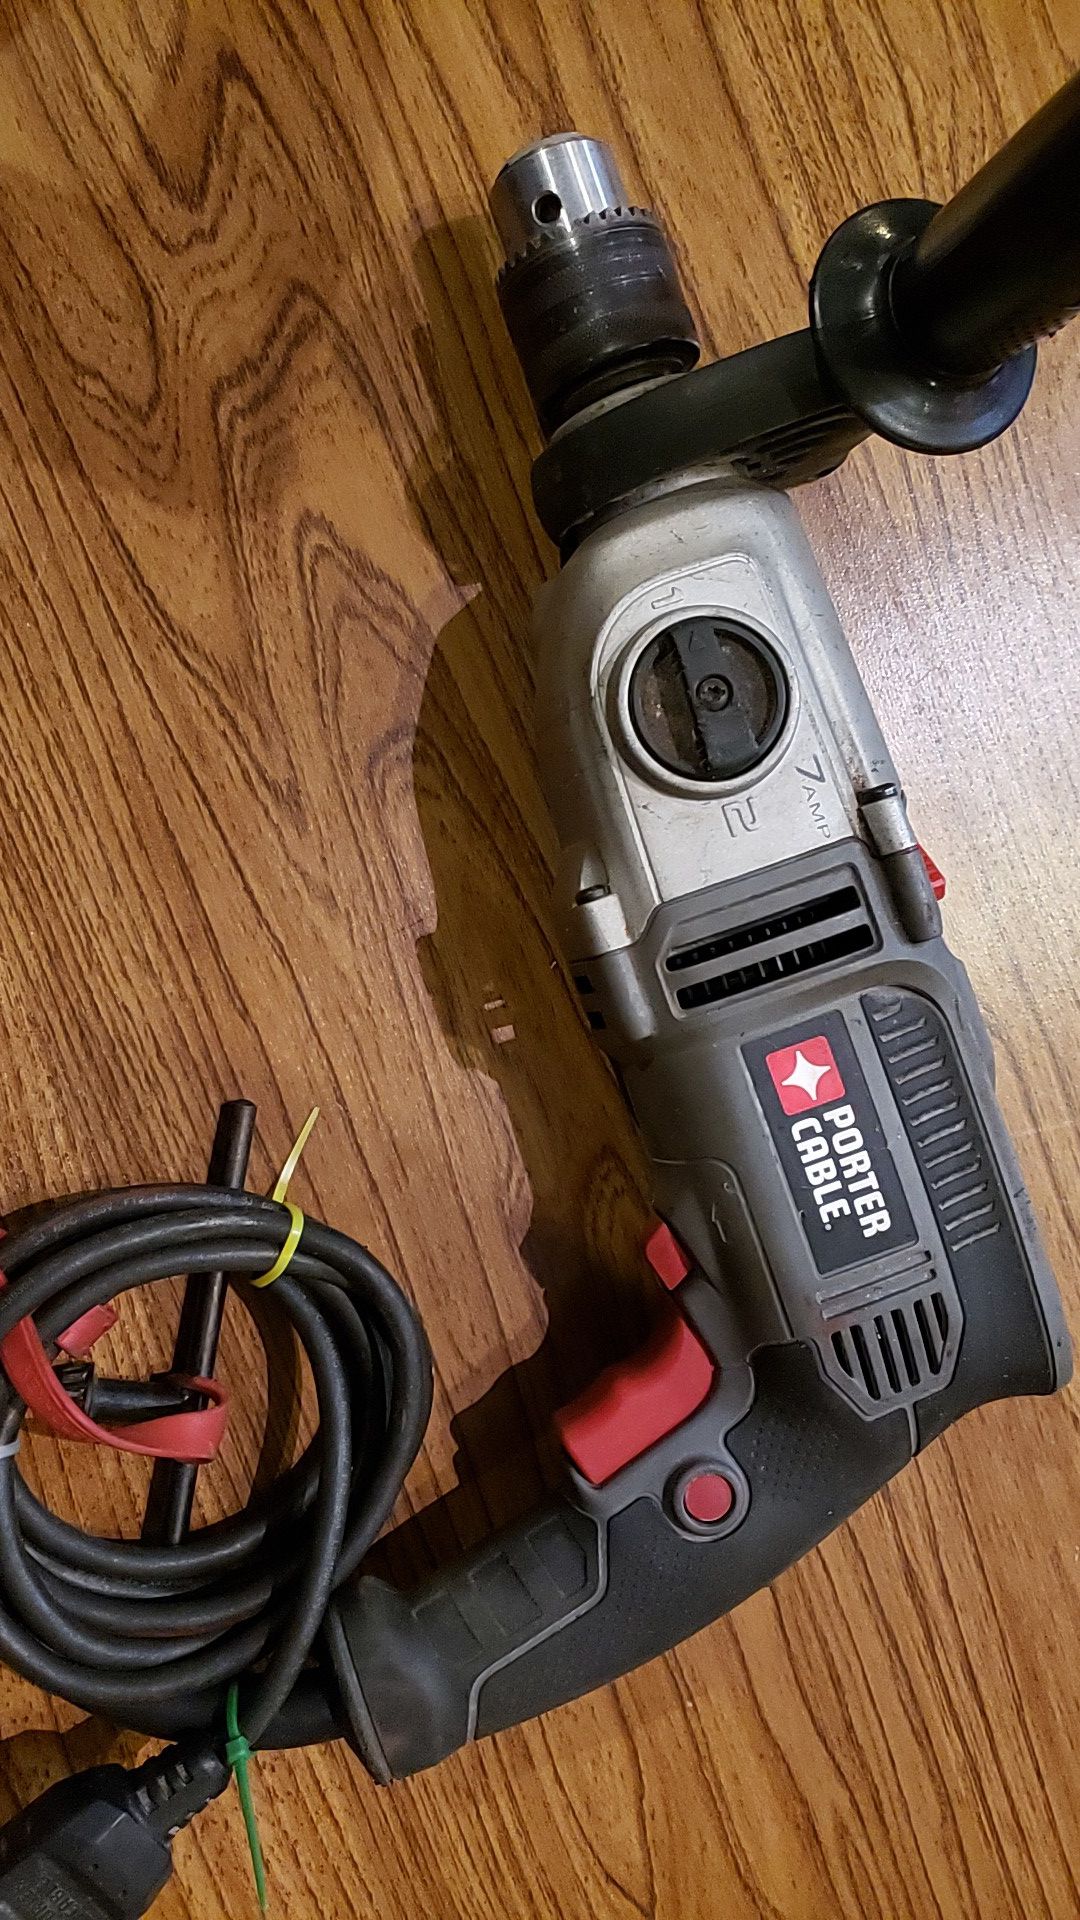 PORTER CABLE (7AMP) HAMMER DRILL